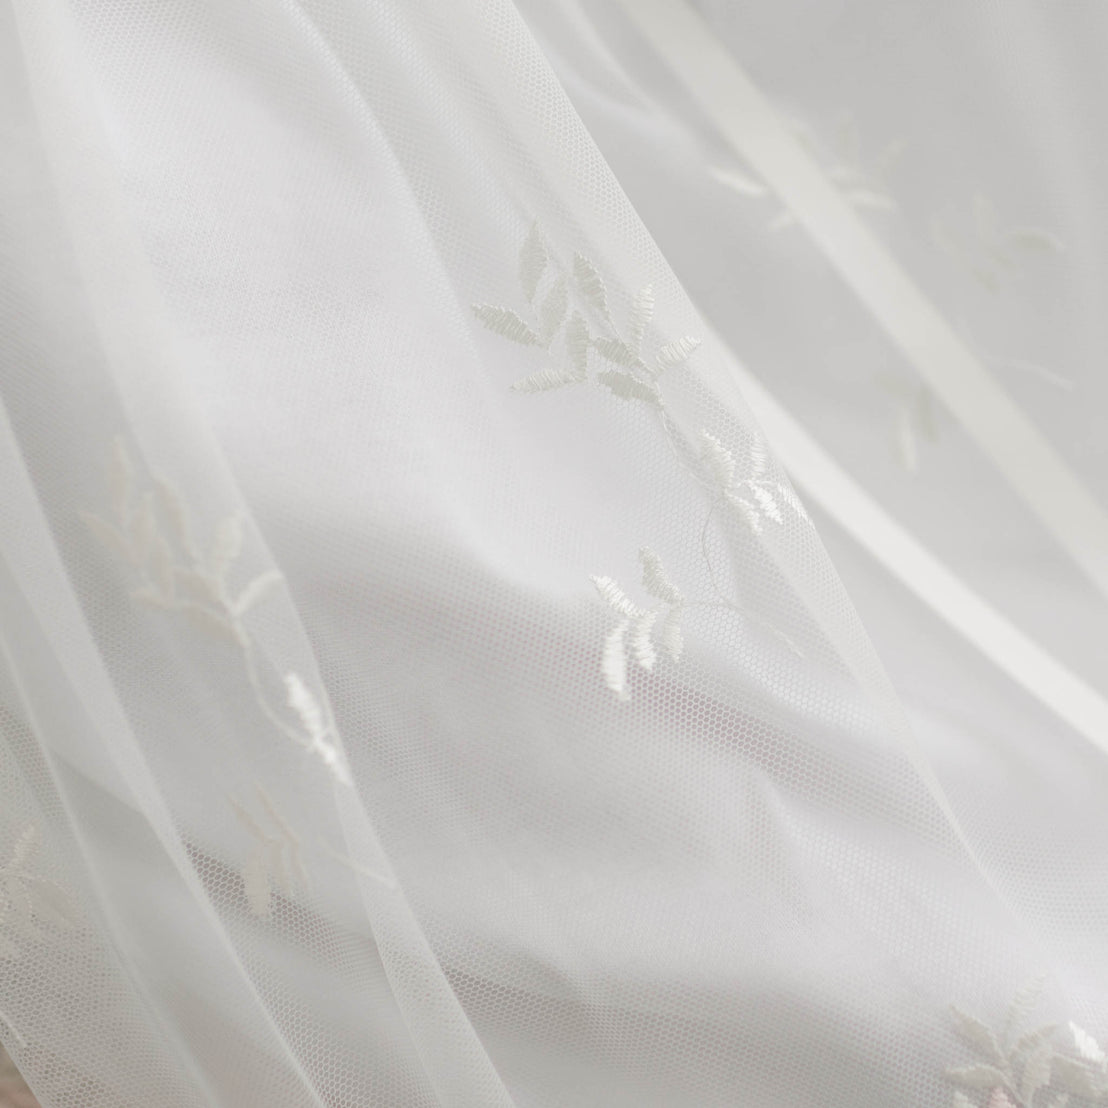 Delicate, sheer Joli Christening Gown with embroidered netting, gently diffusing sunlight, creating a soft and tranquil ambiance.